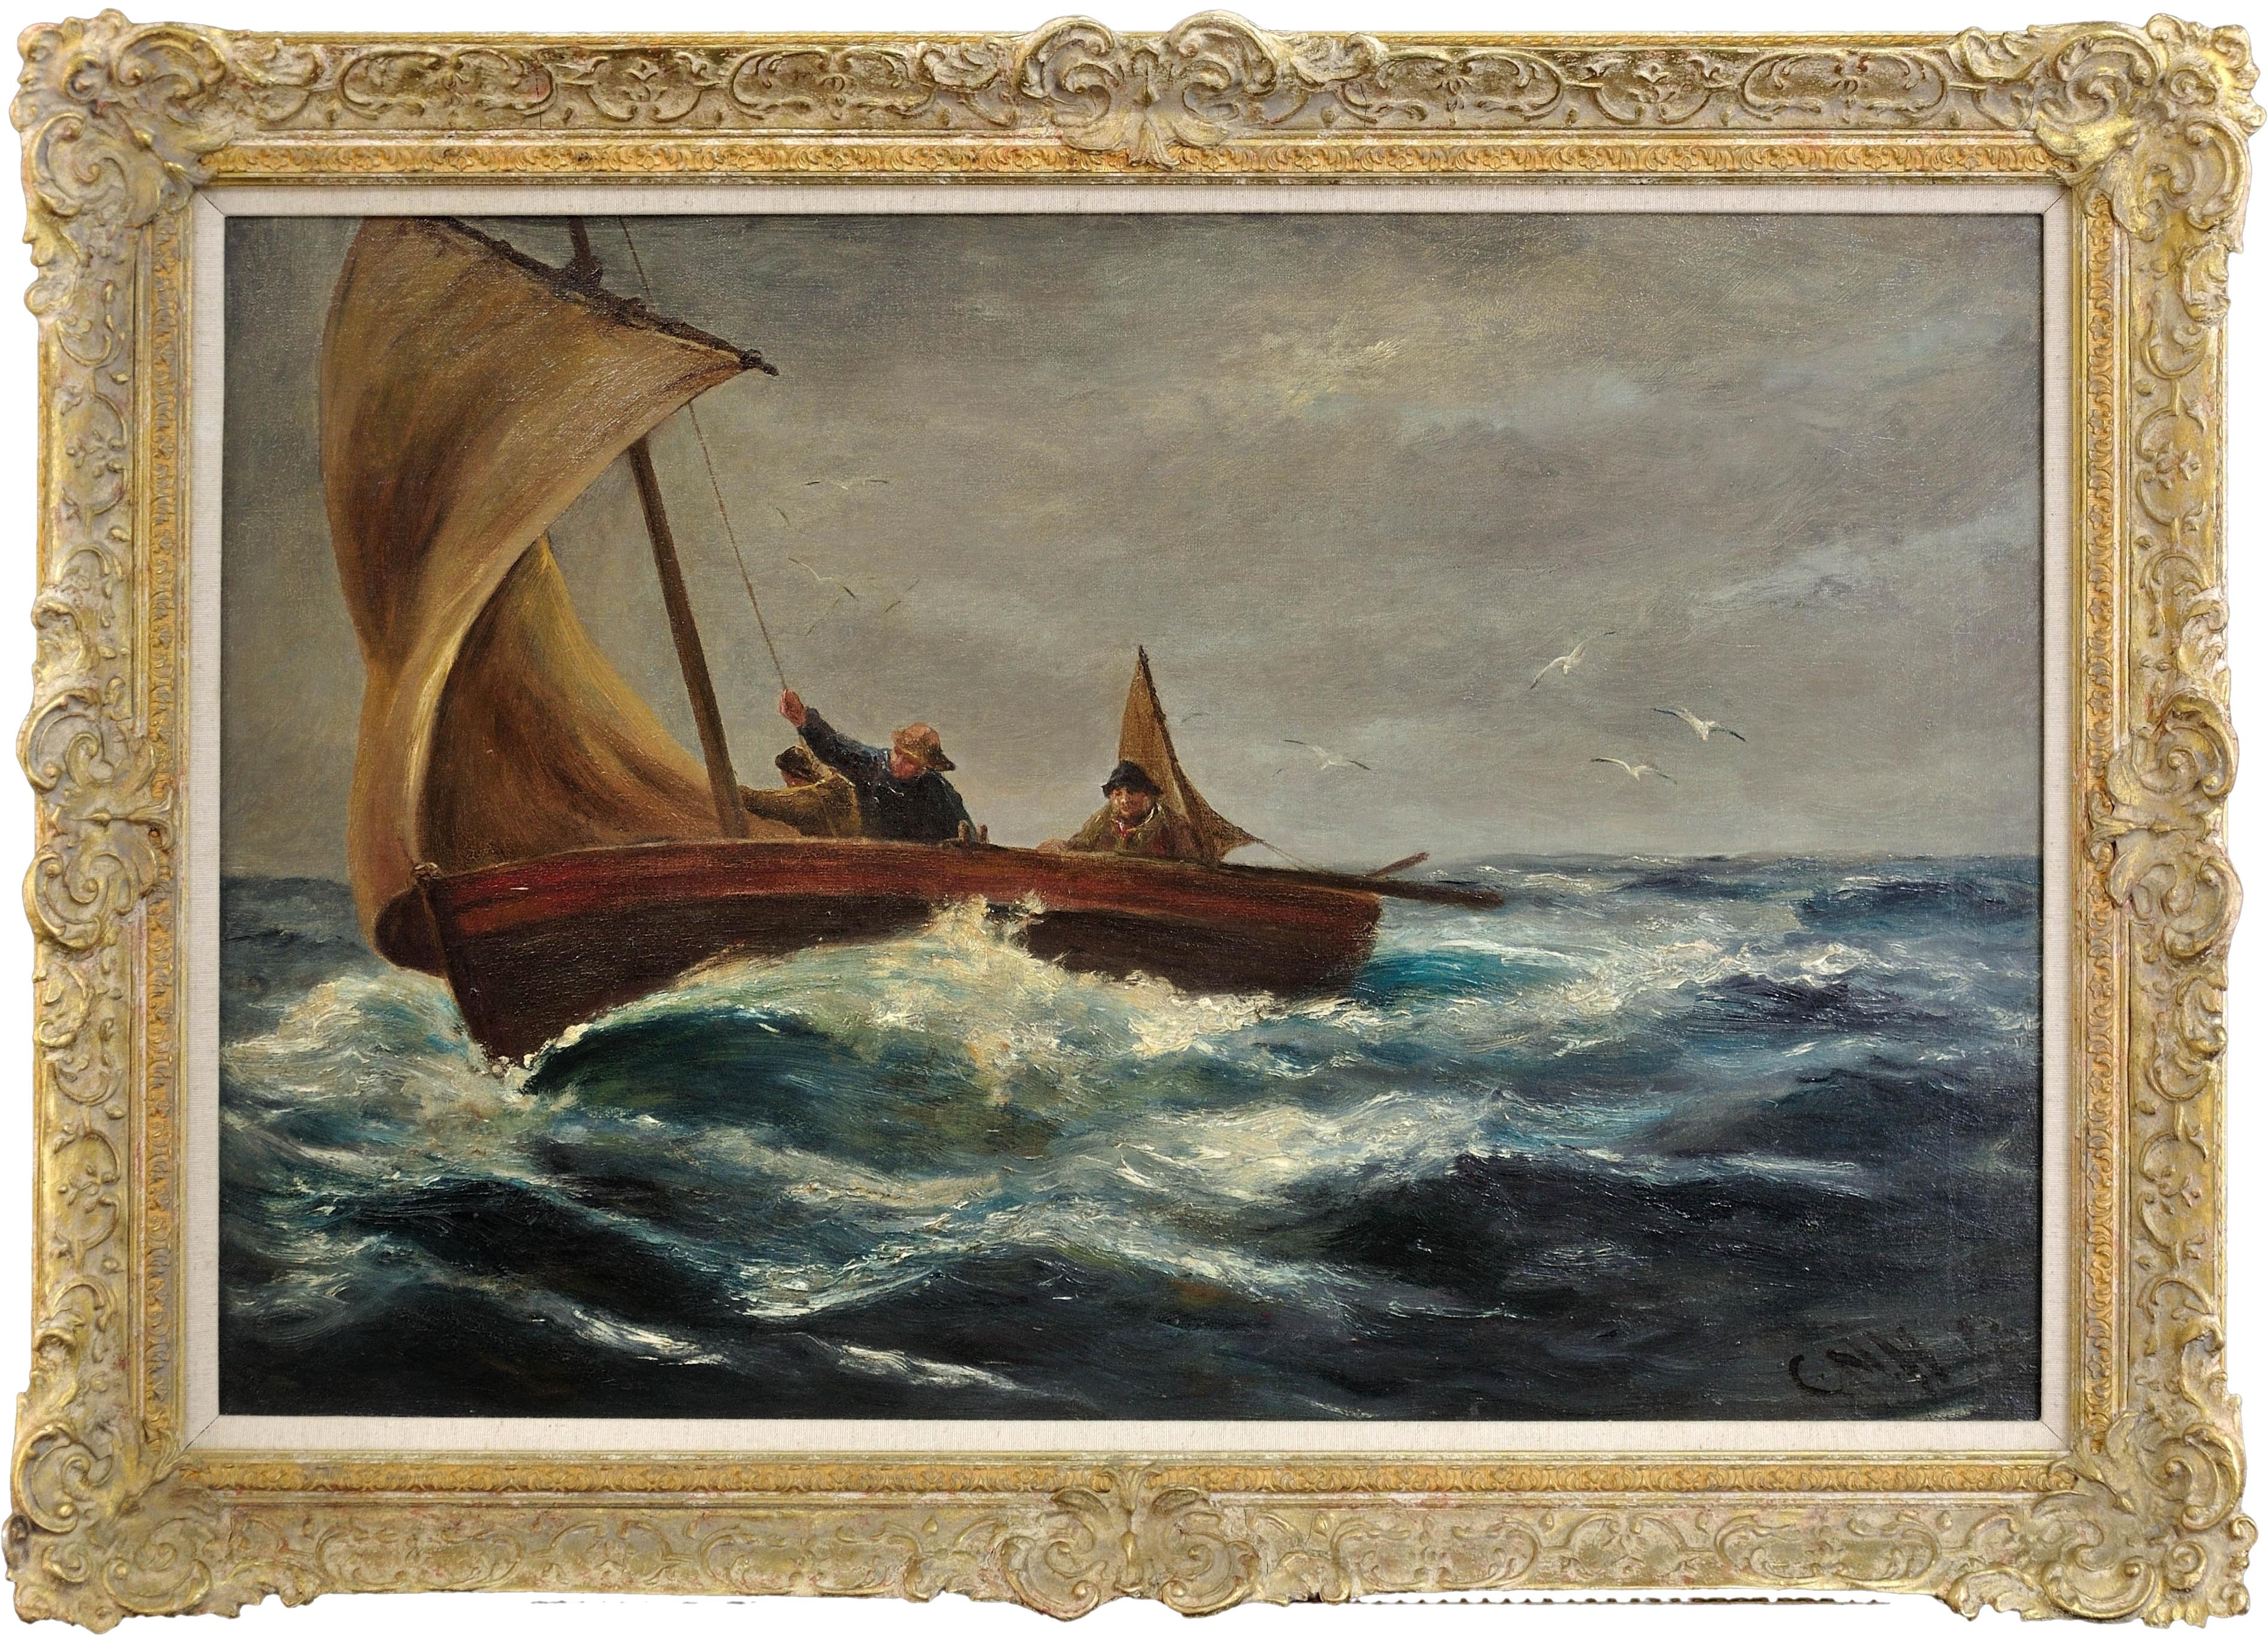 Charles Napier Hemy Landscape Painting - Making the Run for Home, Cornish Coast. Cornwall. Sail Fishing Boat. Pilchards.